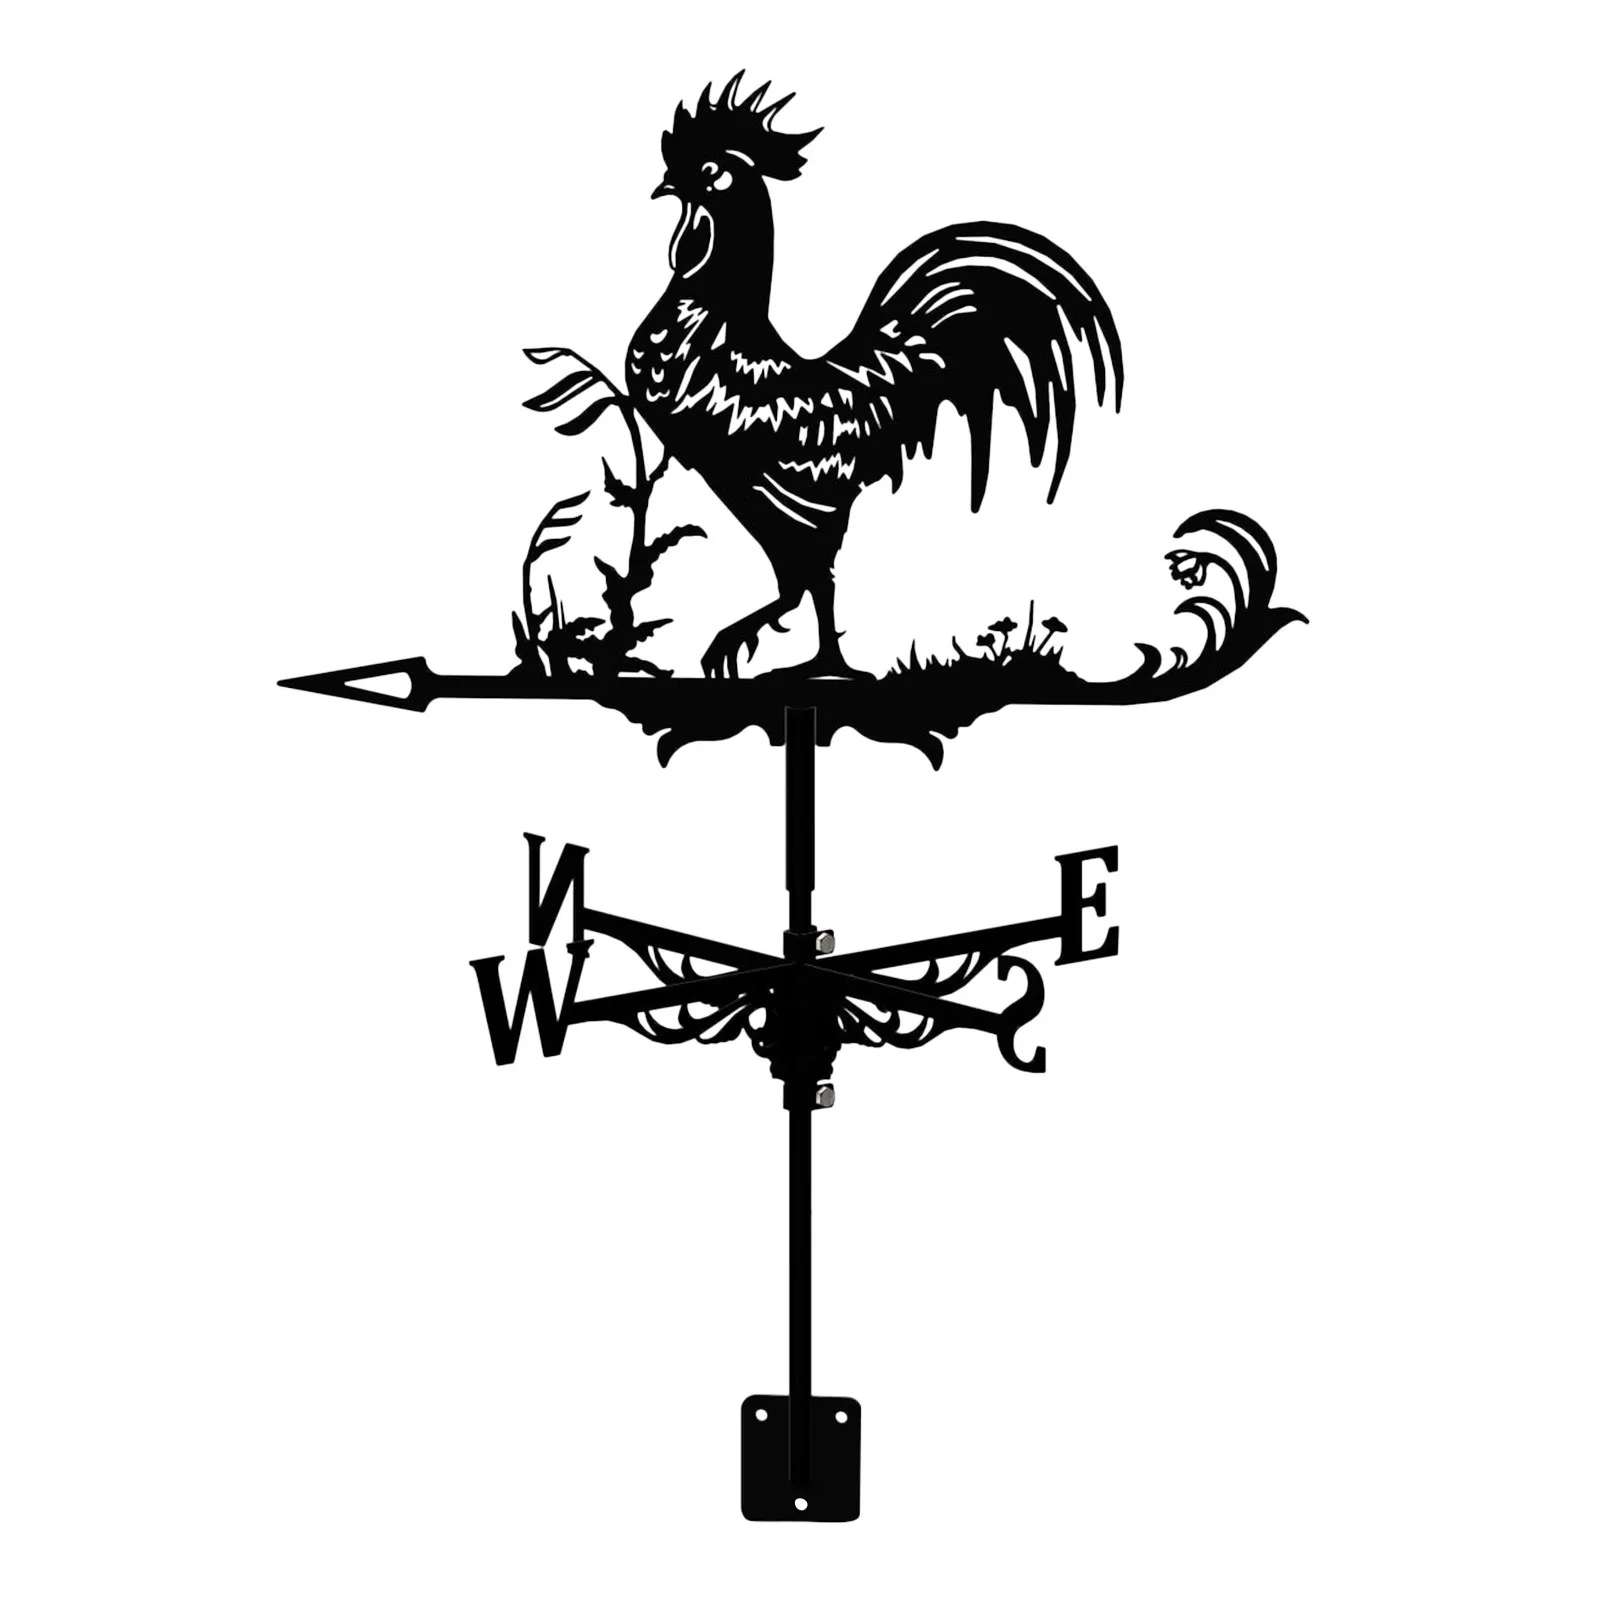 CNMJI Weather Vane Retro Cow Design Weathervane Wind Direction Indicator Stainless Steel Weathercock Measuring Tool with Mounting Bracket for Garden Patio Yard Ornament Decoration 